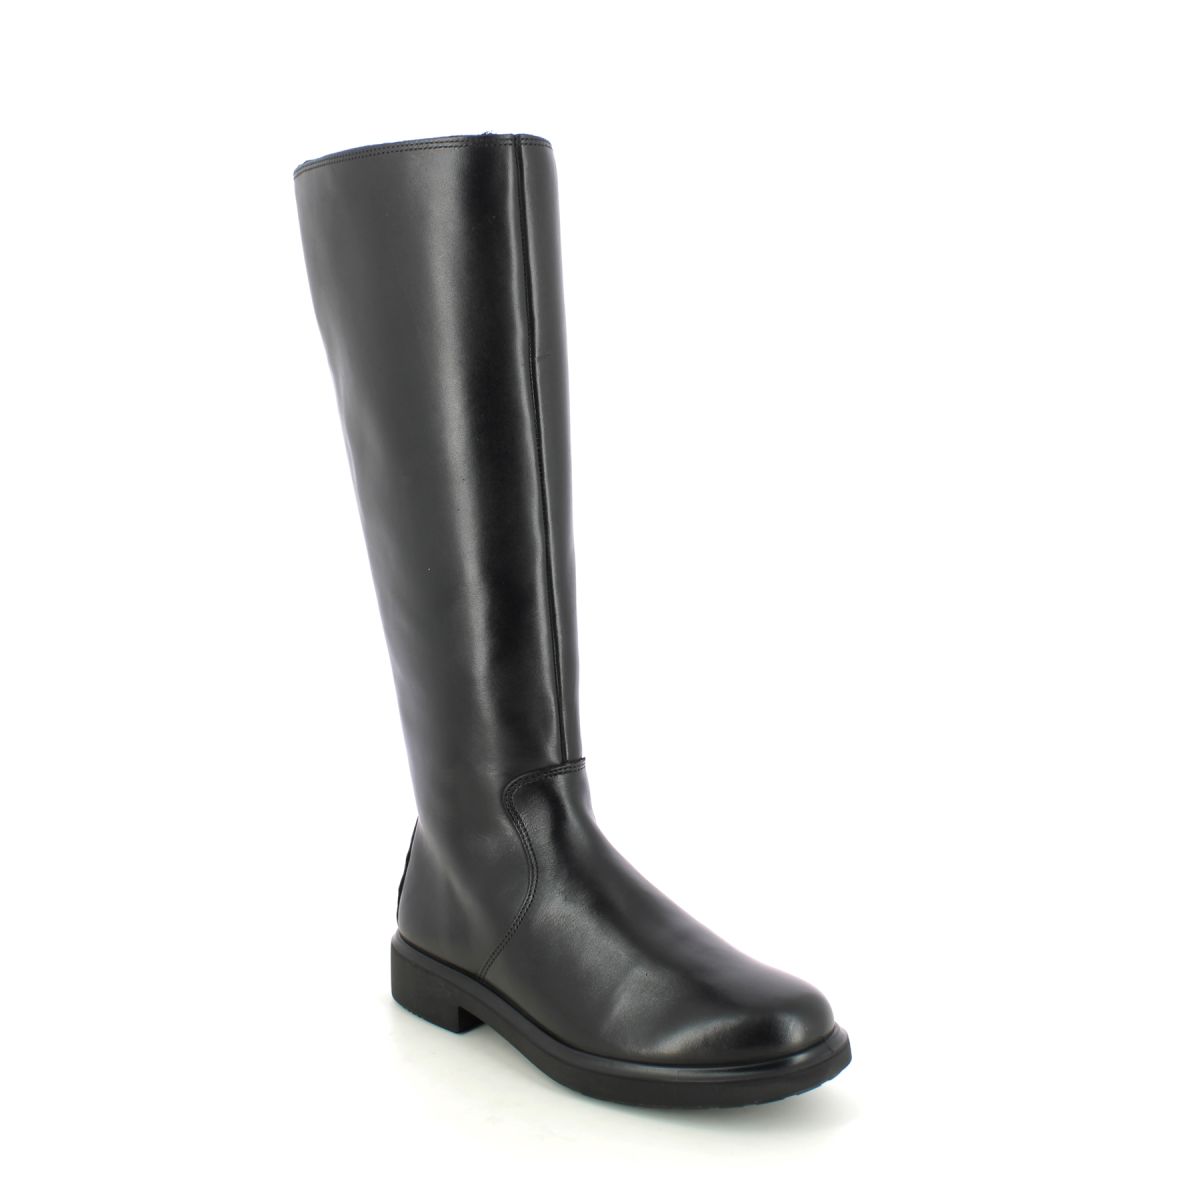 ECCO Amsterdam Metropole Tex Black leather Womens knee-high boots 222023-01001 in a Plain Leather in Size 38